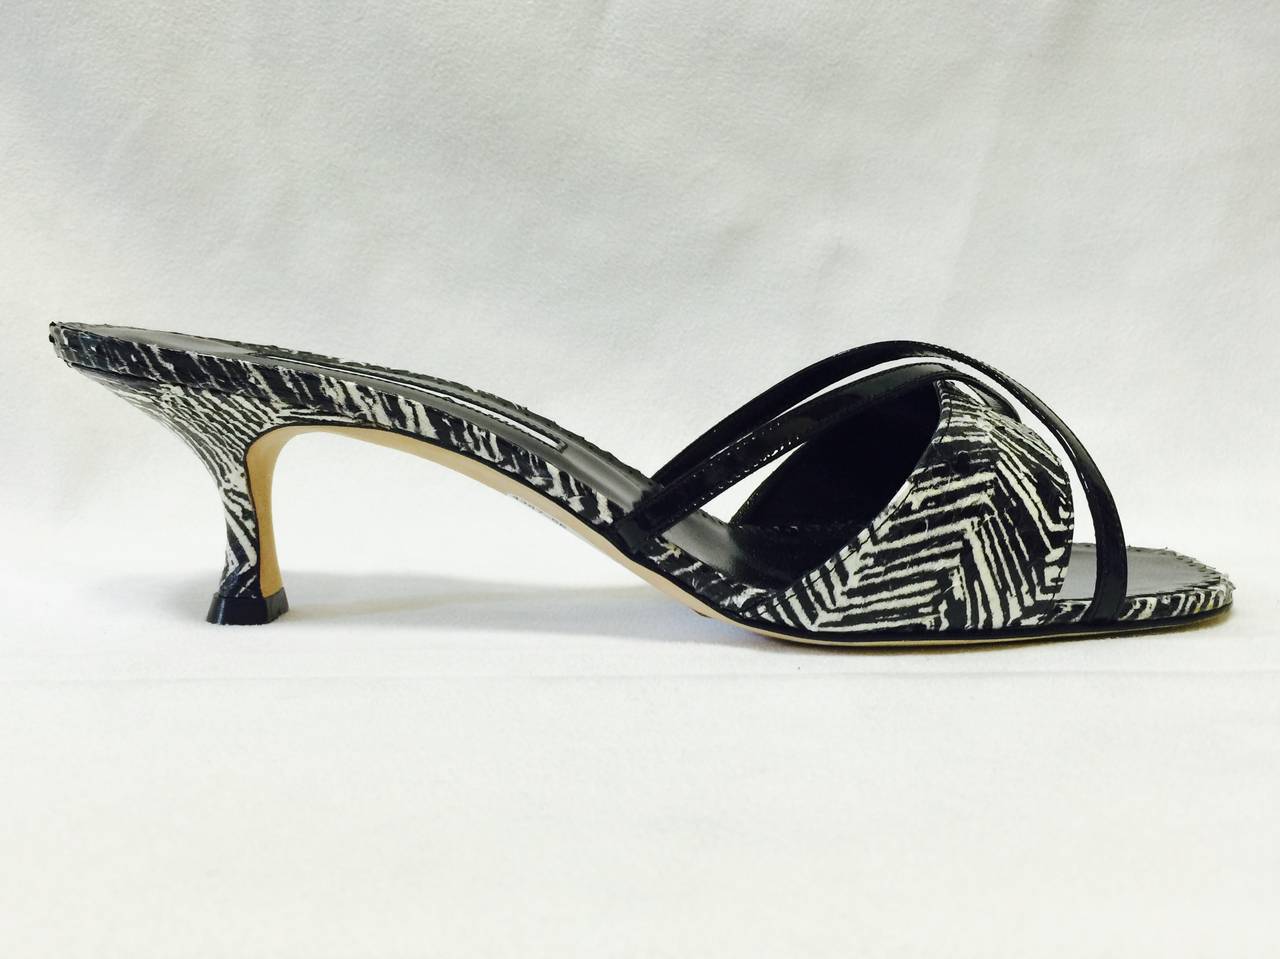 These Manolo Blahnik Mules show why this superstar shoe designer is beloved by some of the world's most influential women!  Features supple snakeskin, coy kitten heels, and paten leather cross straps.  Black and white print is reminiscent of zebra. 